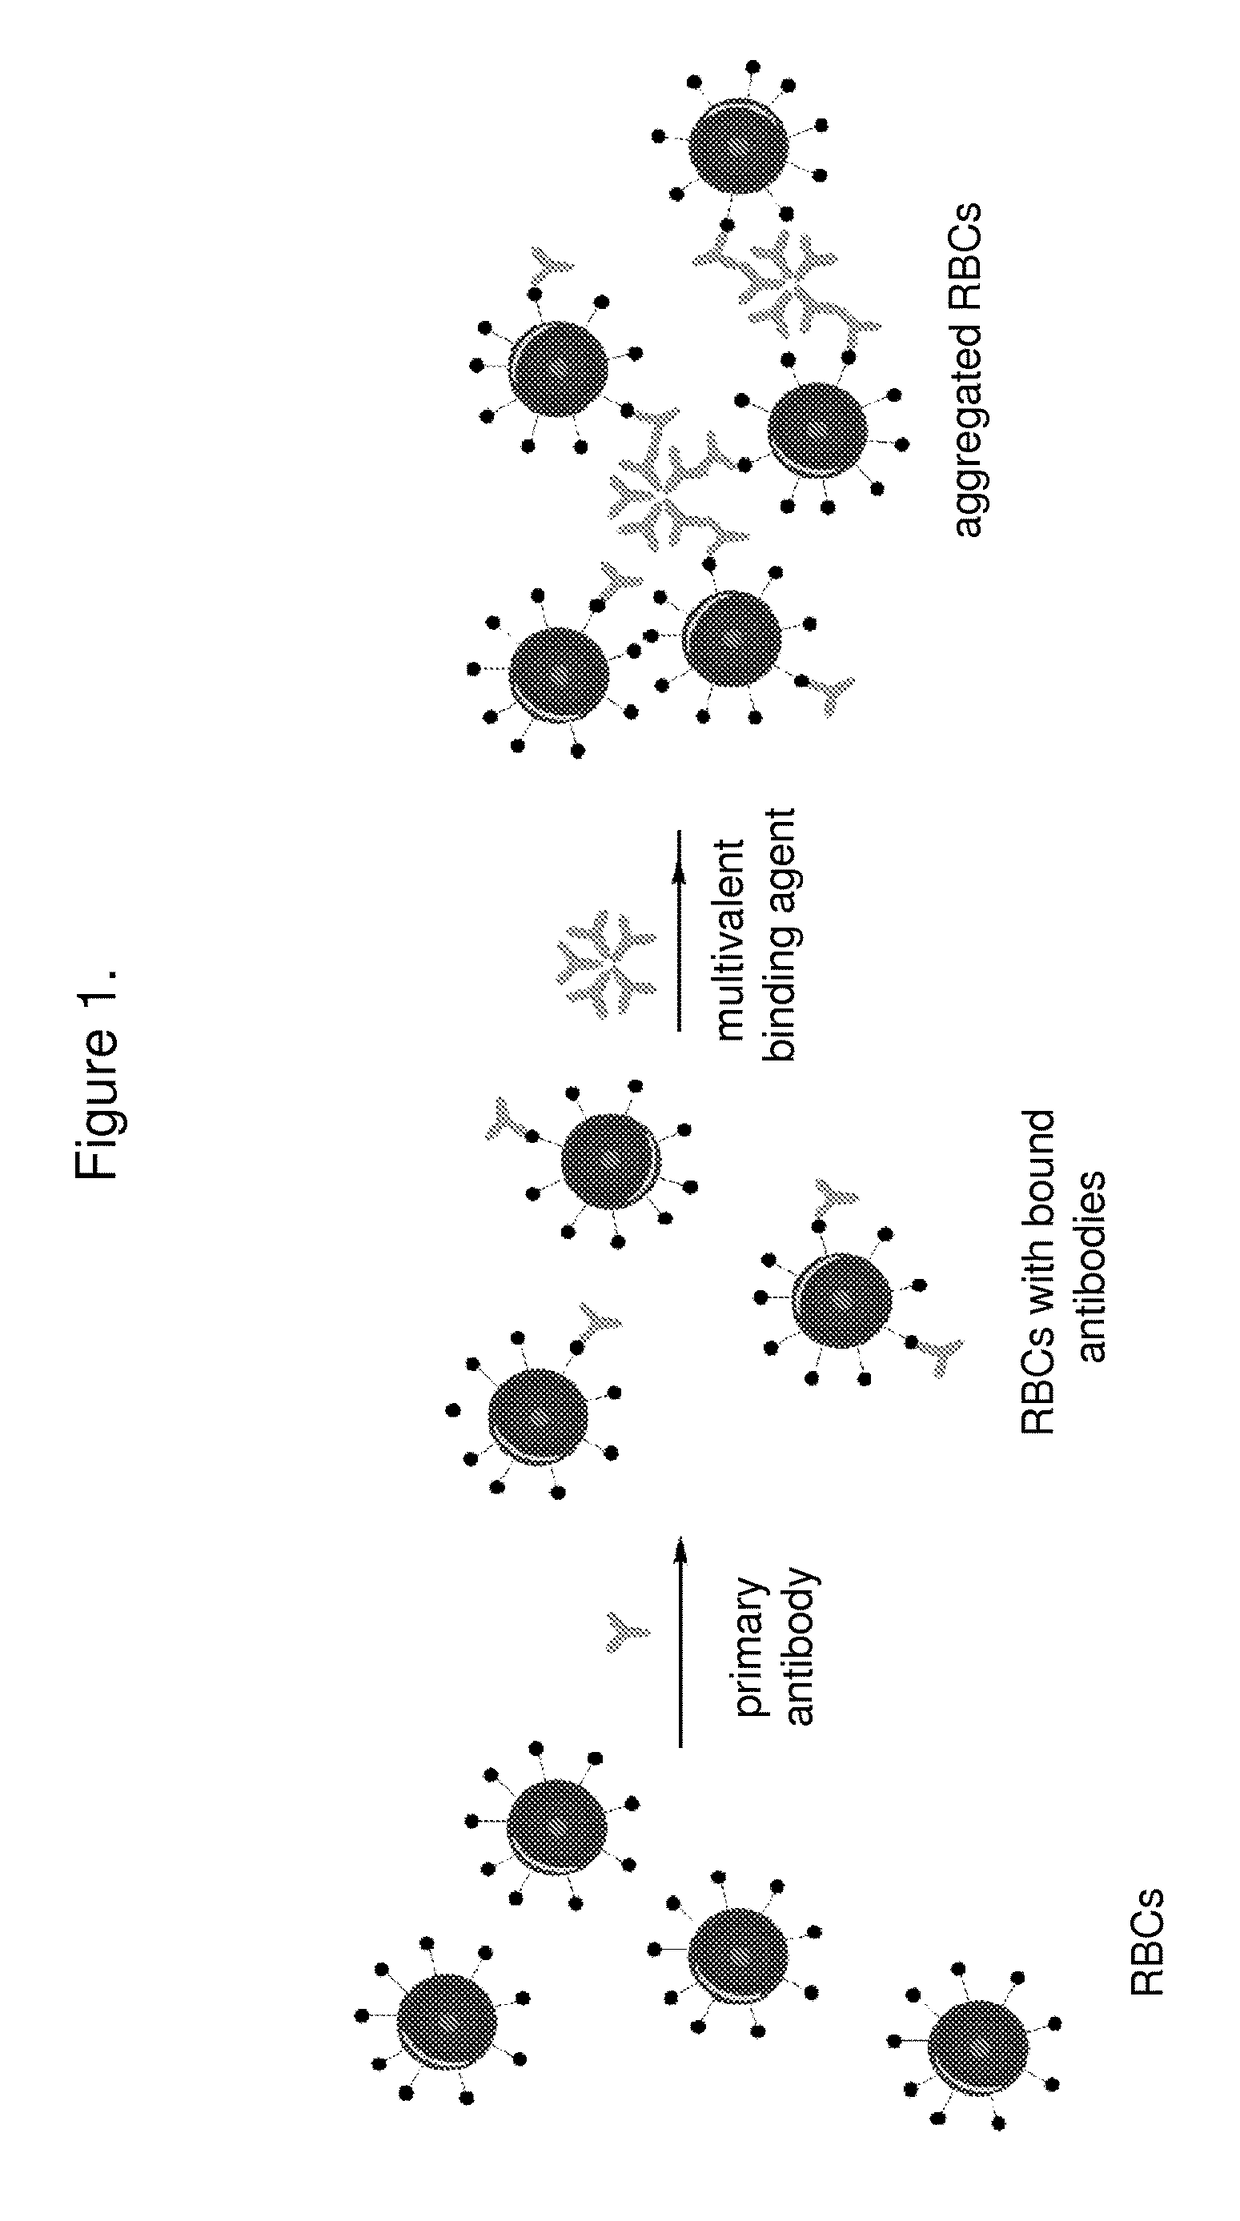 Methods for blood typing and antibody screening